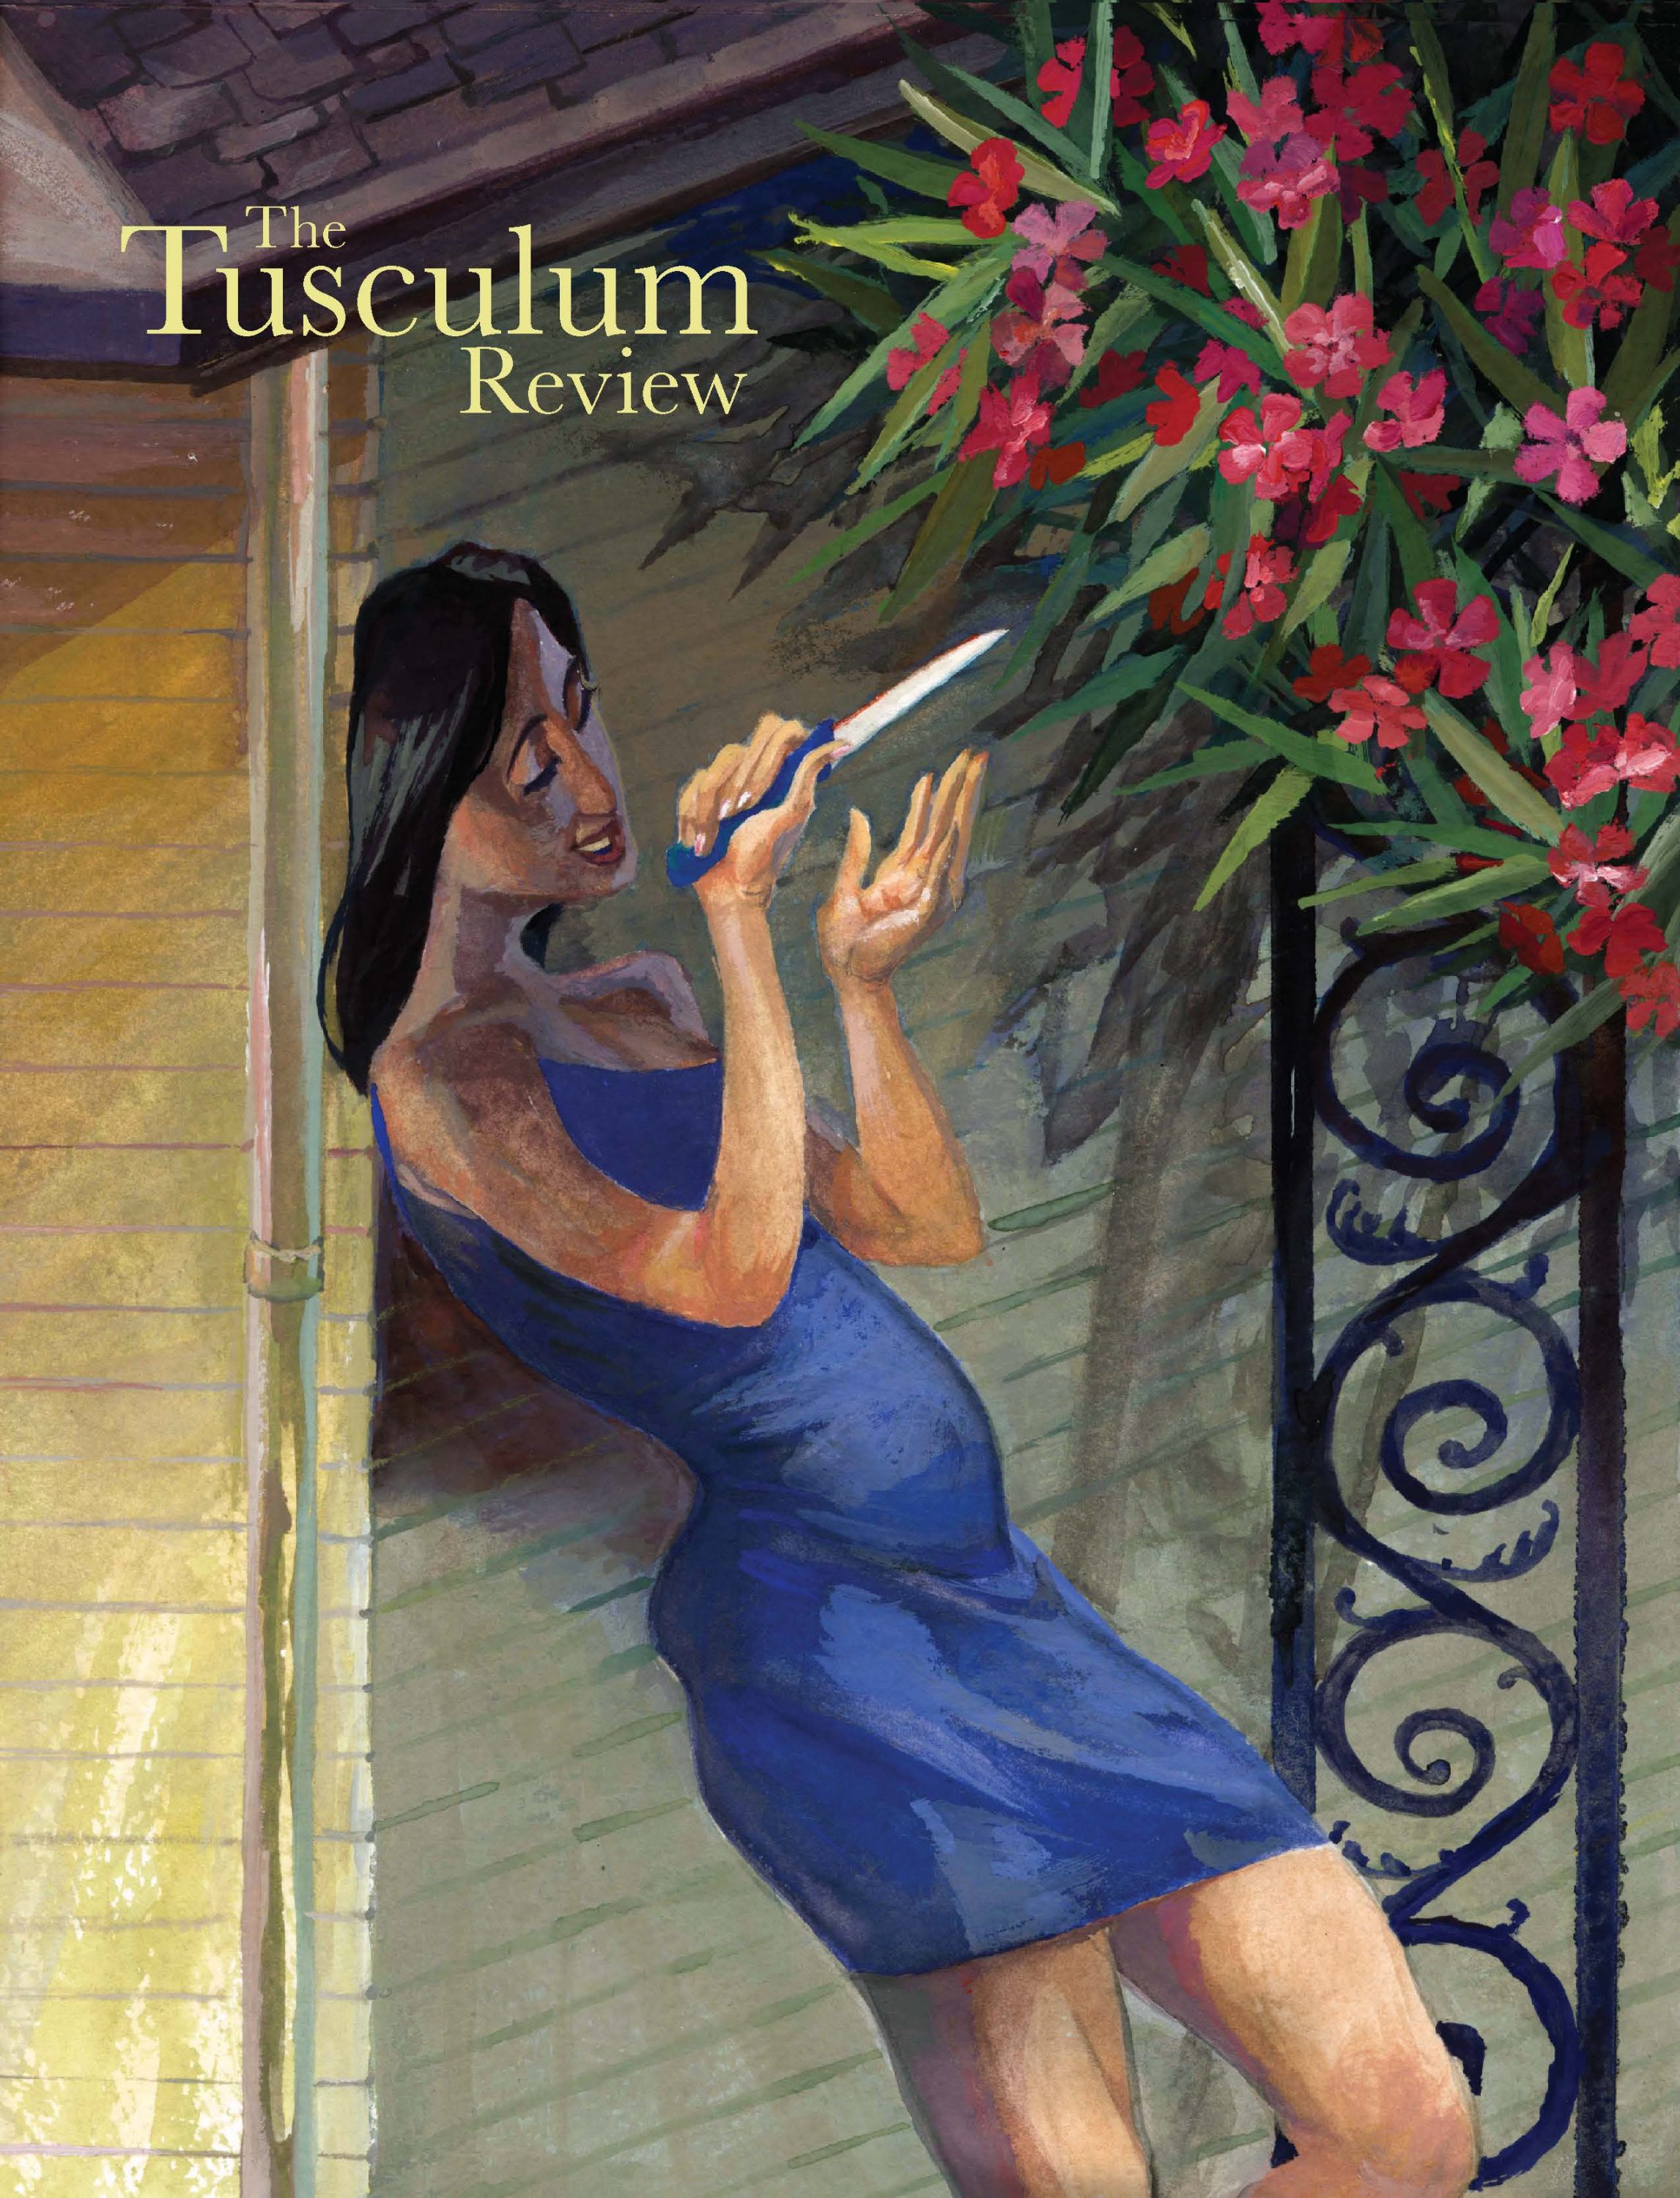 The cover of volume 18 features a woman looking at a gleaming knife while leaning against a building covered in vining flowers